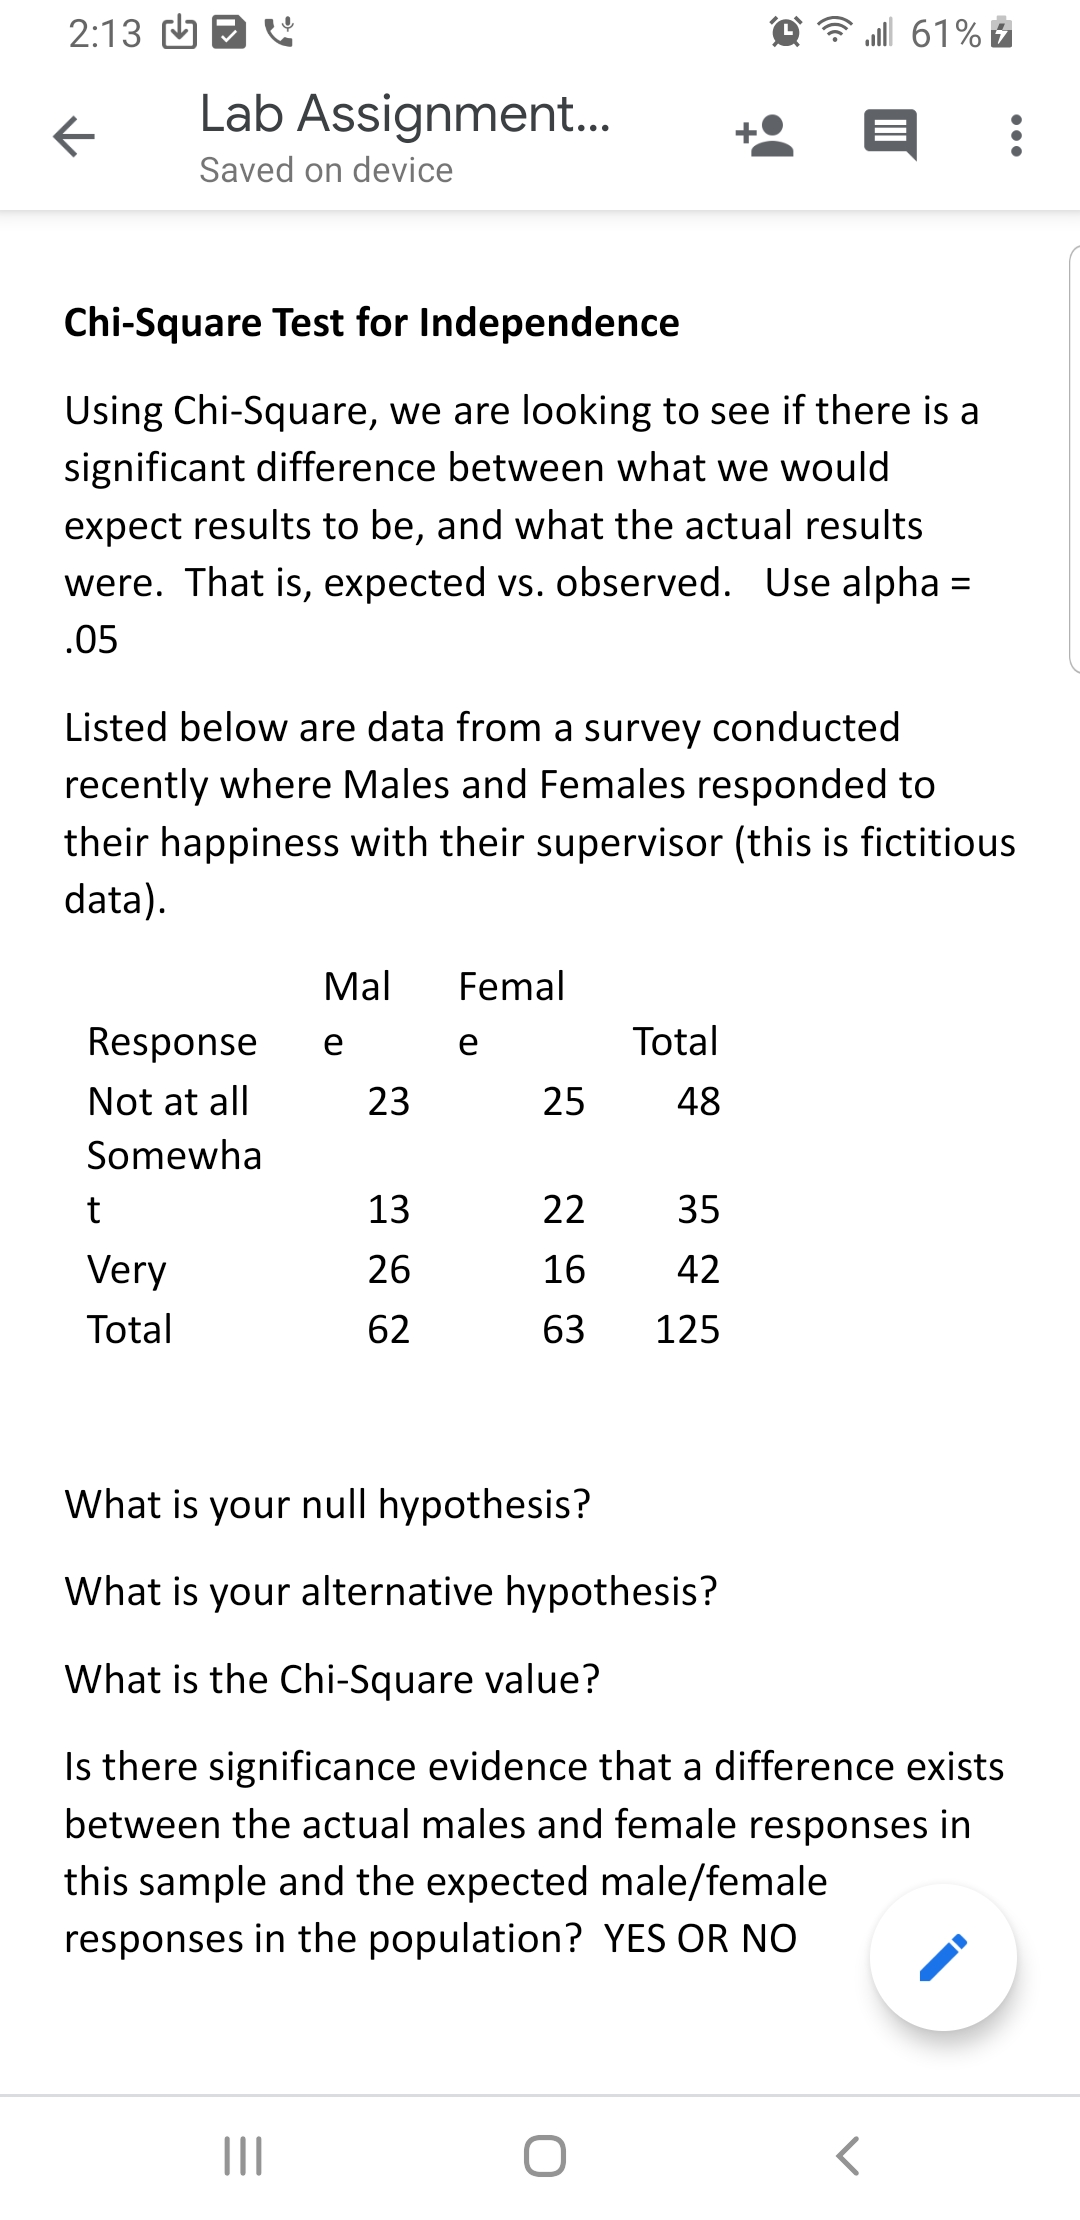 61%
2:13
Lab Assignment...
Saved on device
Chi-Square Test for Independence
Using Chi-Square, we are looking to see if there is a
significant difference between what we would
expect results to be, and what the actual results
were. That is, expected vs. observed. Use alpha
05
Listed below are data from a survey conducted
recently where Males and Females responded to
their happiness with their supervisor (this is fictitious
data)
Femal
Mal
Total
Response
е
е
23
48
Not at all
25
Somewha
22
13
35
26
16
42
Very
Total
62
63
125
What is your null hypothesis?
What is your alternative hypothesis?
What is the Chi-Square value?
Is there significance evidence that a difference exists
between the actual males and female responses in
this sample and the expected male/female
responses in the population? YES OR NO
II
